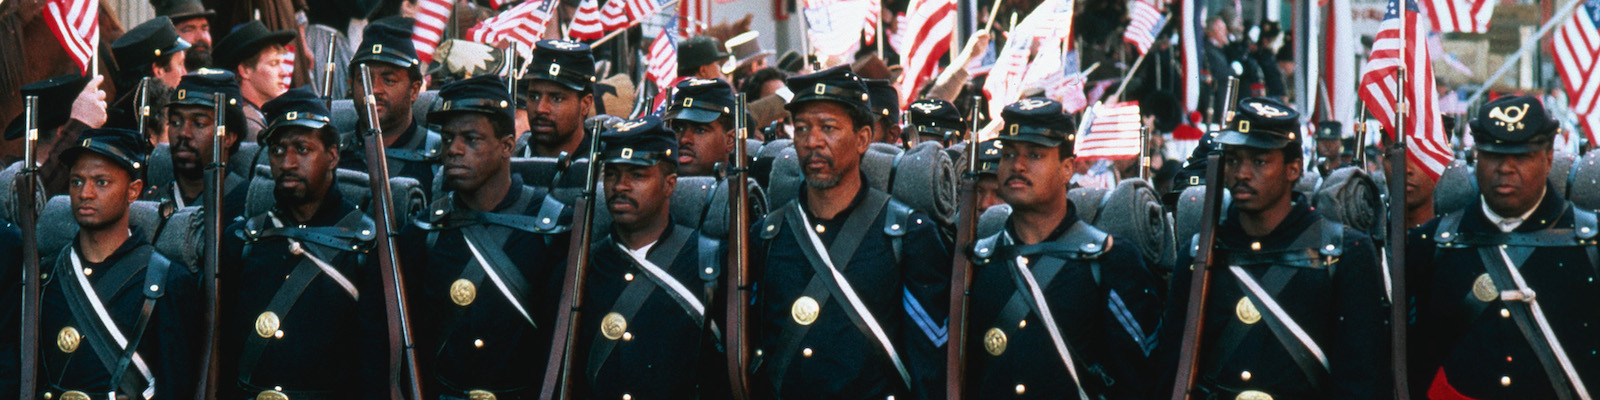 Black soldiers march in uniform in front of American flags in Glory